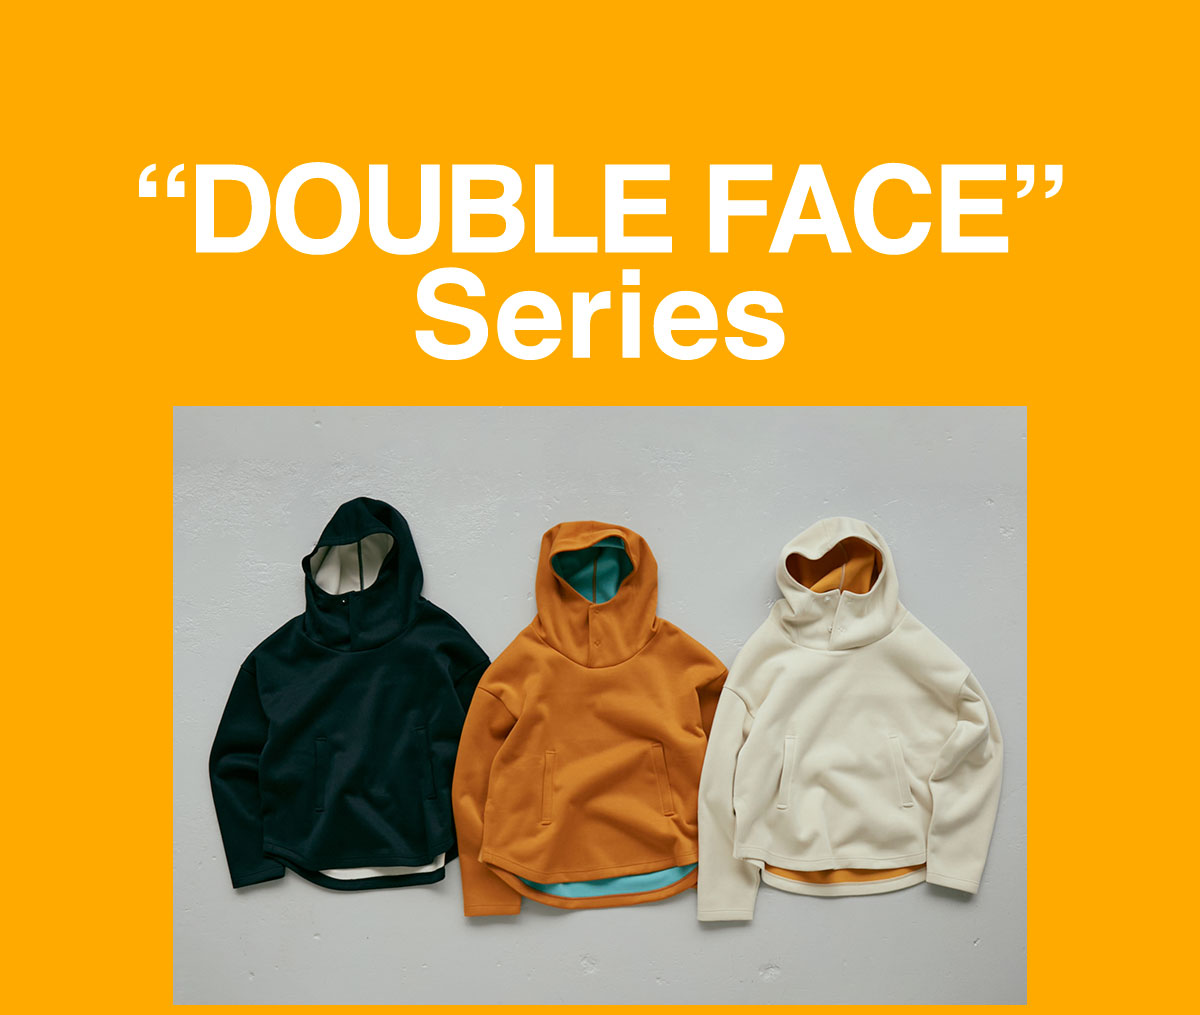 “DOUBLE FACE” Series